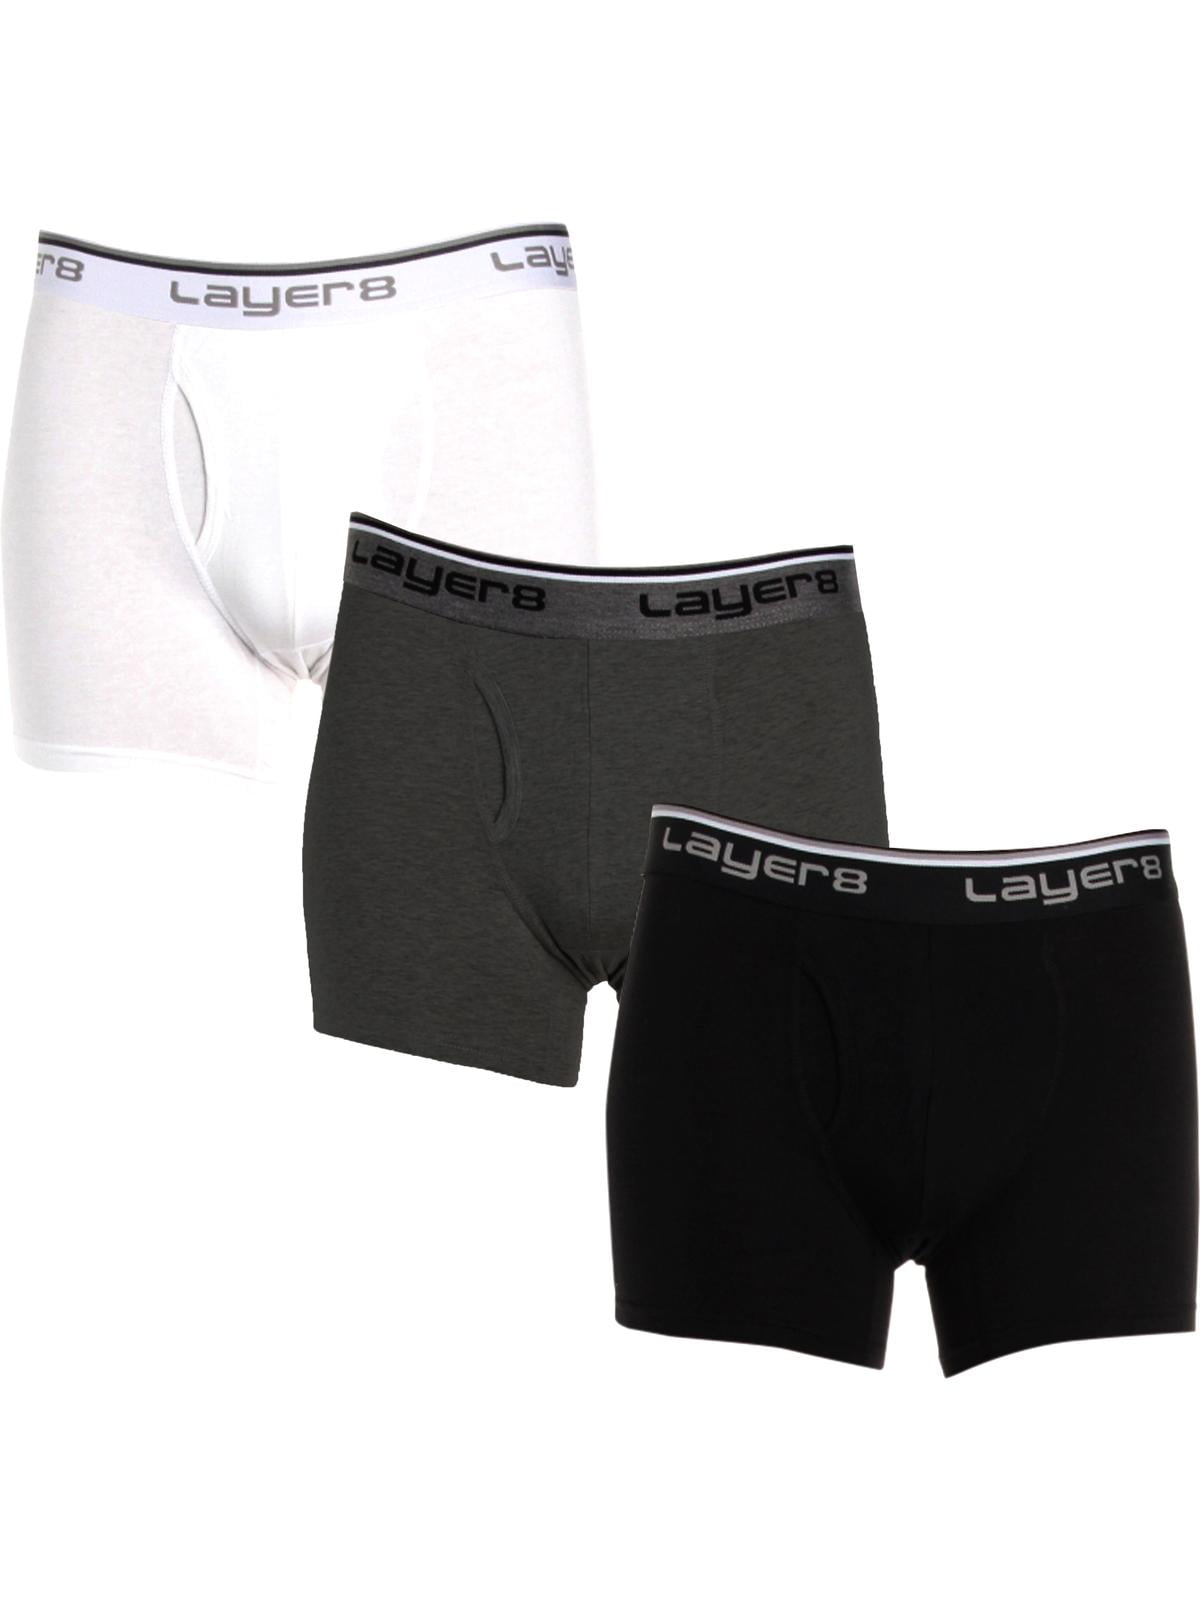 Layer 8 Mens 6-Pack Sport Performance Boxer Briefs - Caviar Small